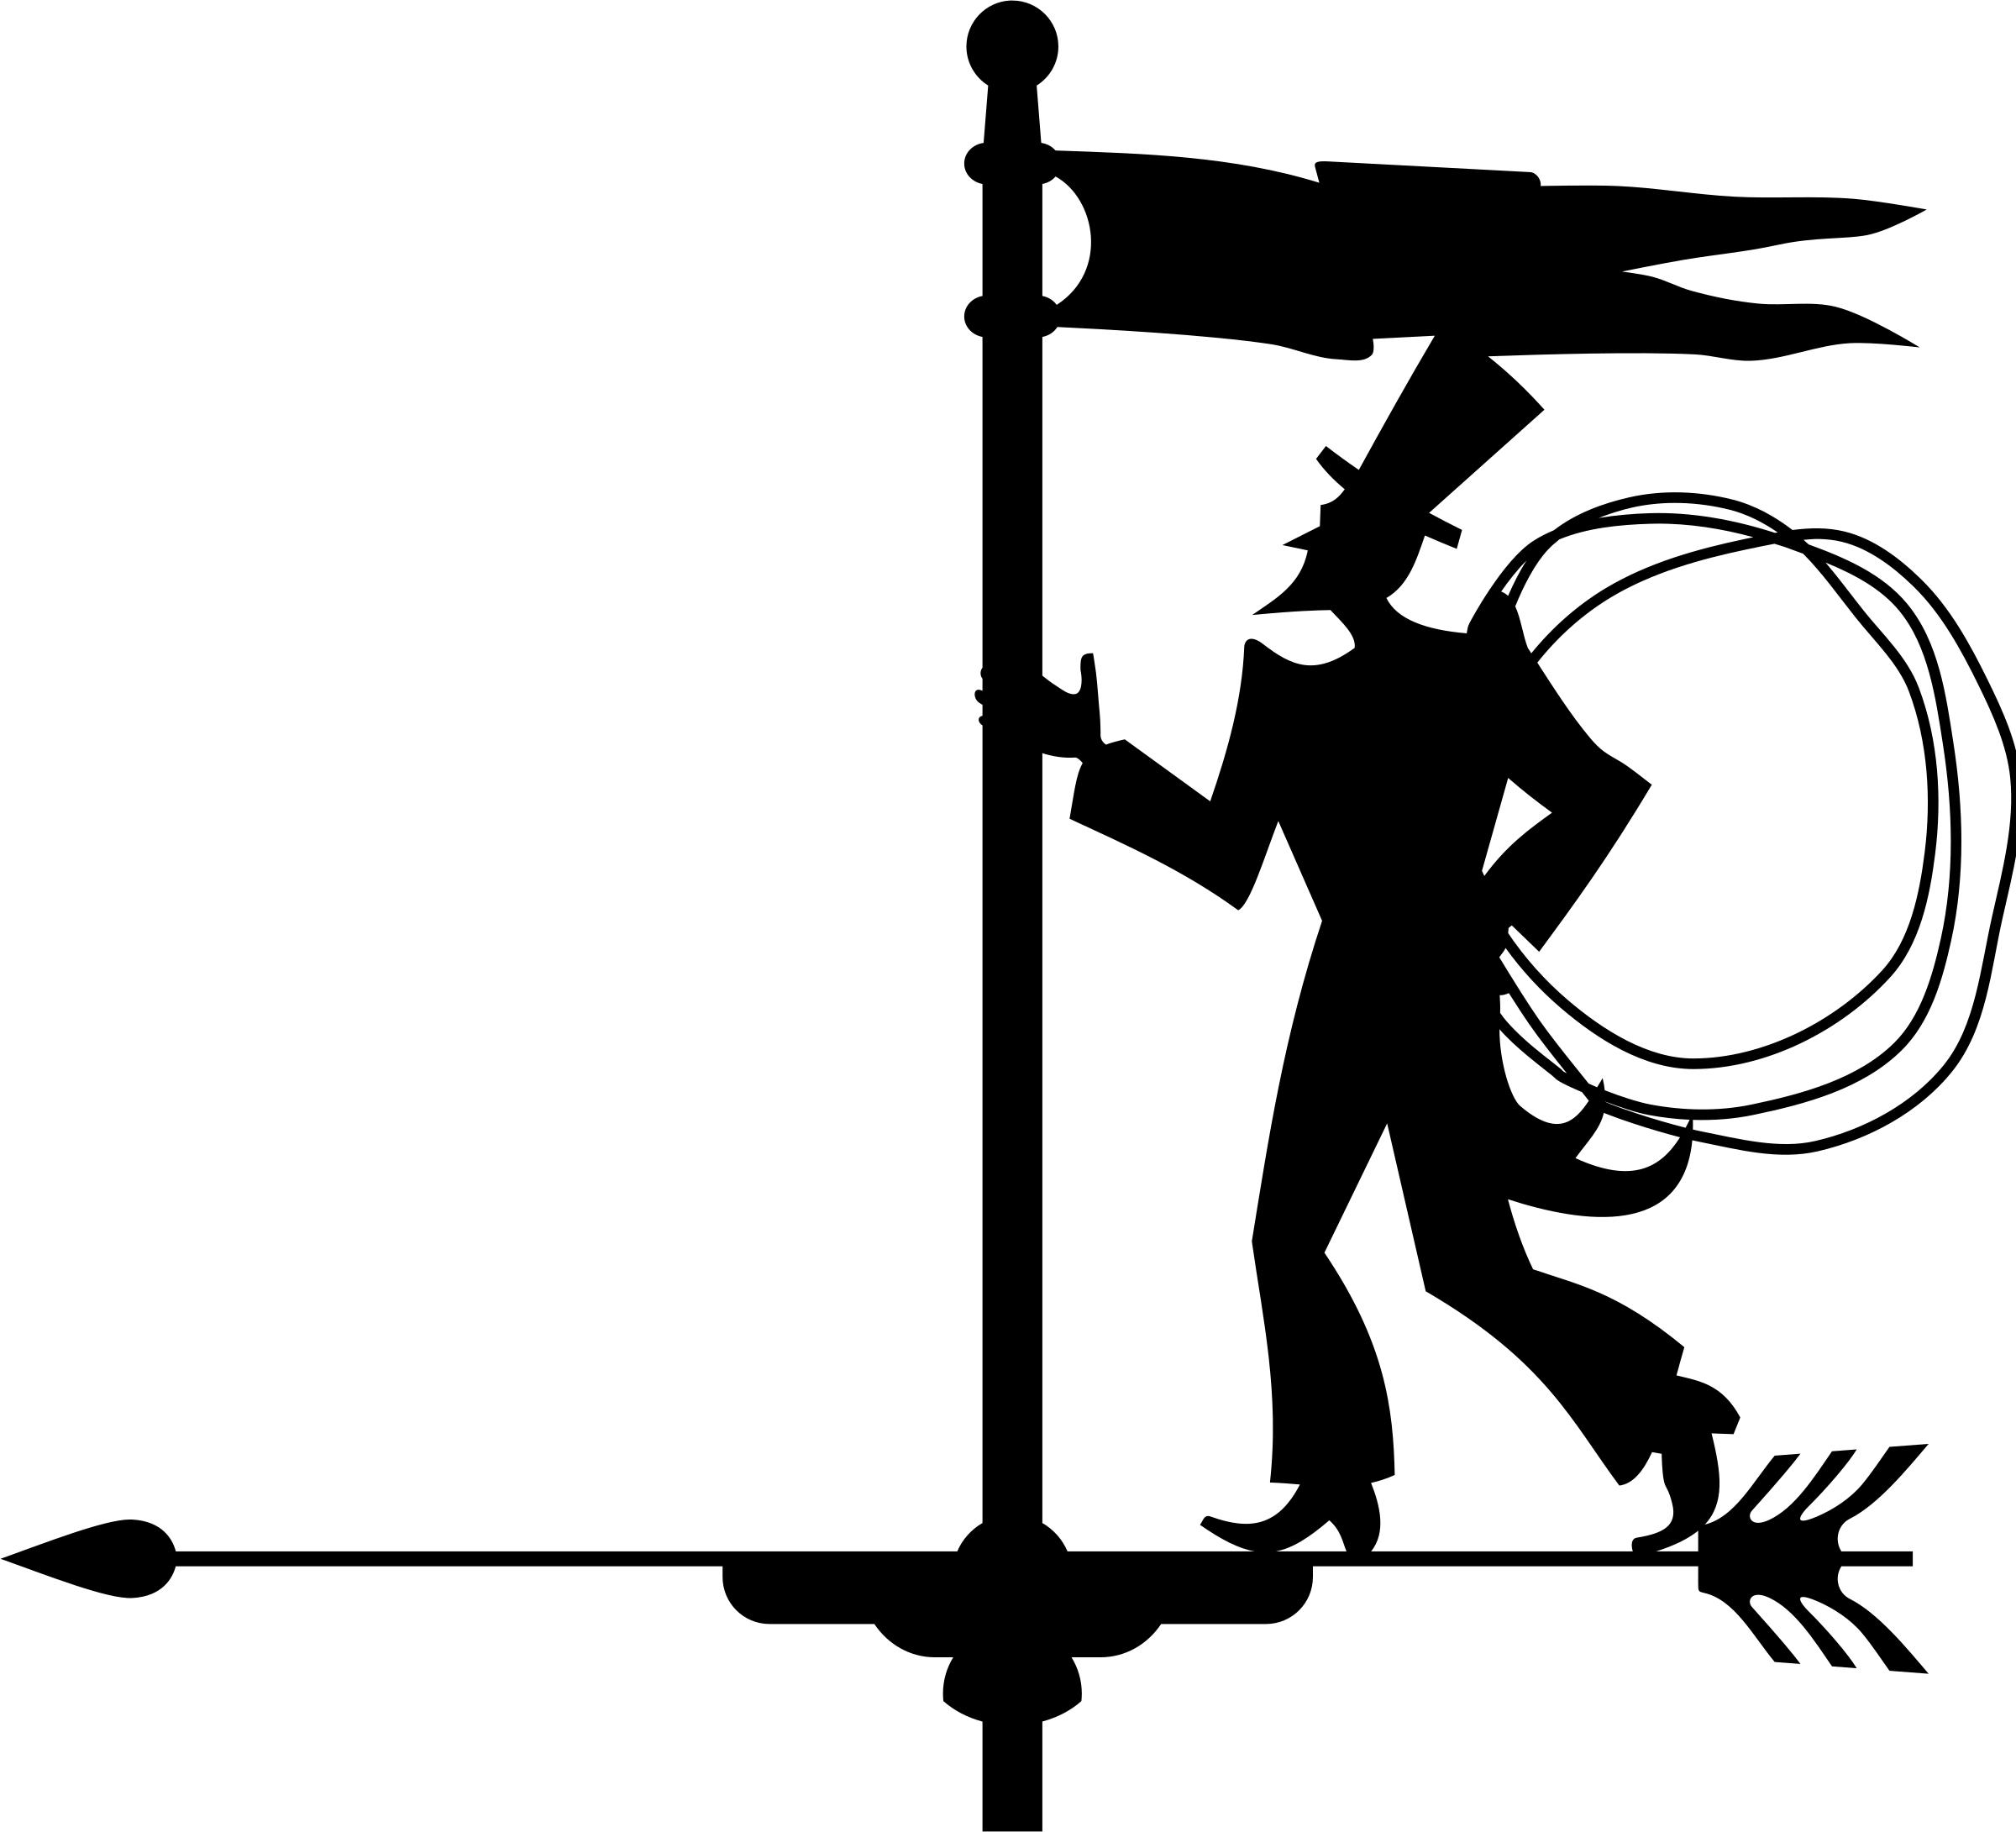 Vane chimney sweep by Rones PNG icons